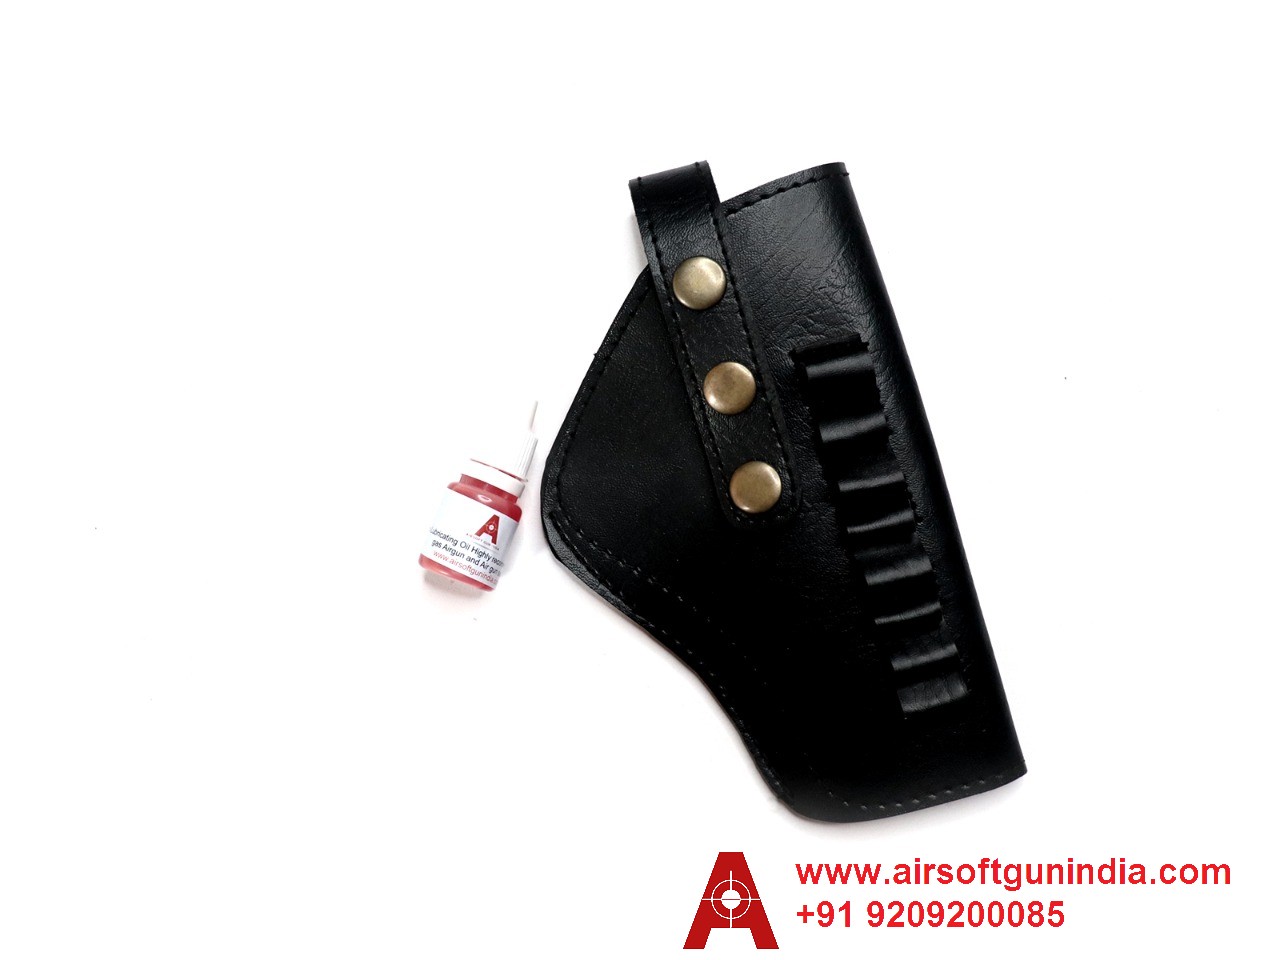 Cover For Air Revolver And Air Pistol With Pellgun Oil Combo Deal